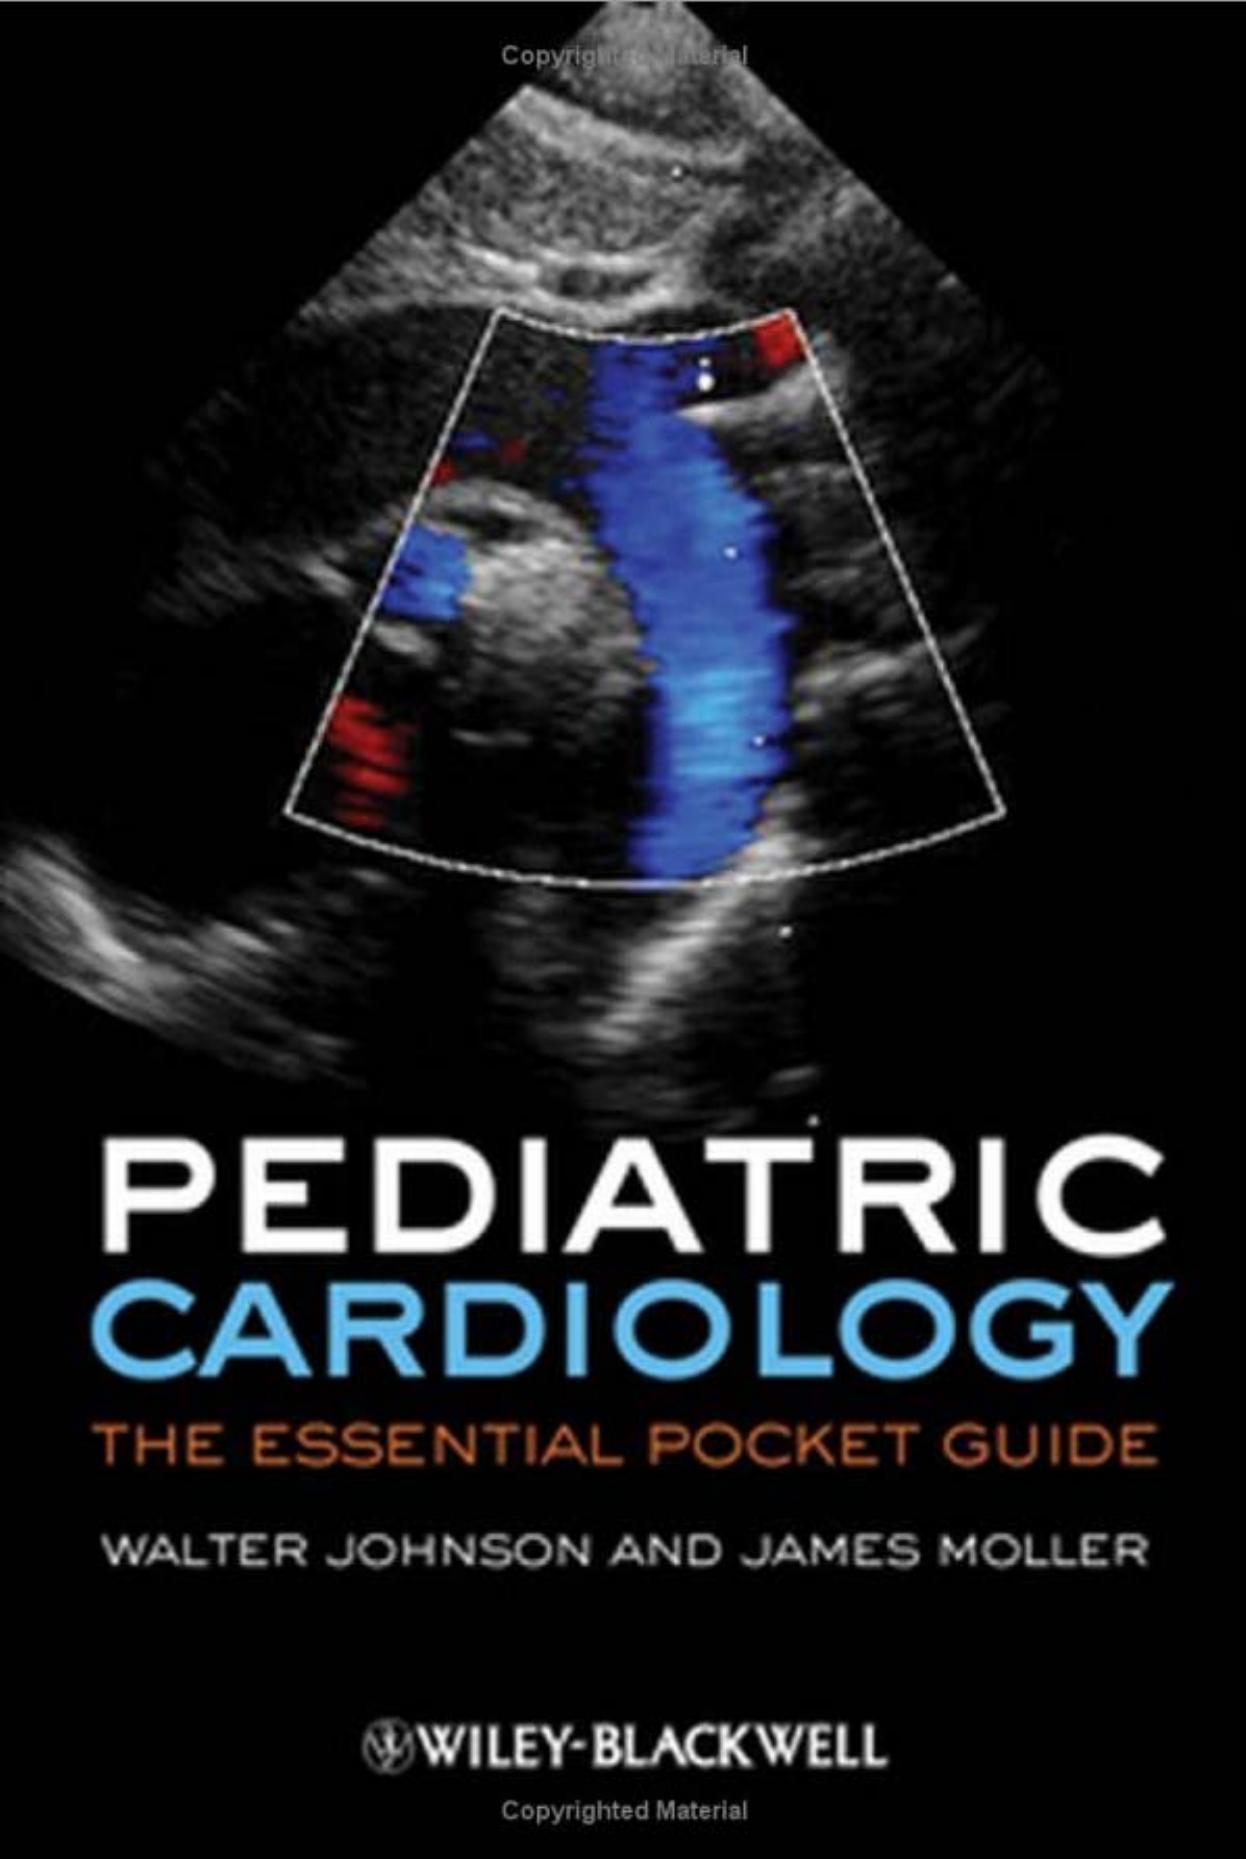 Pediatric Cardiology  The Essential Pocket Guide 2008